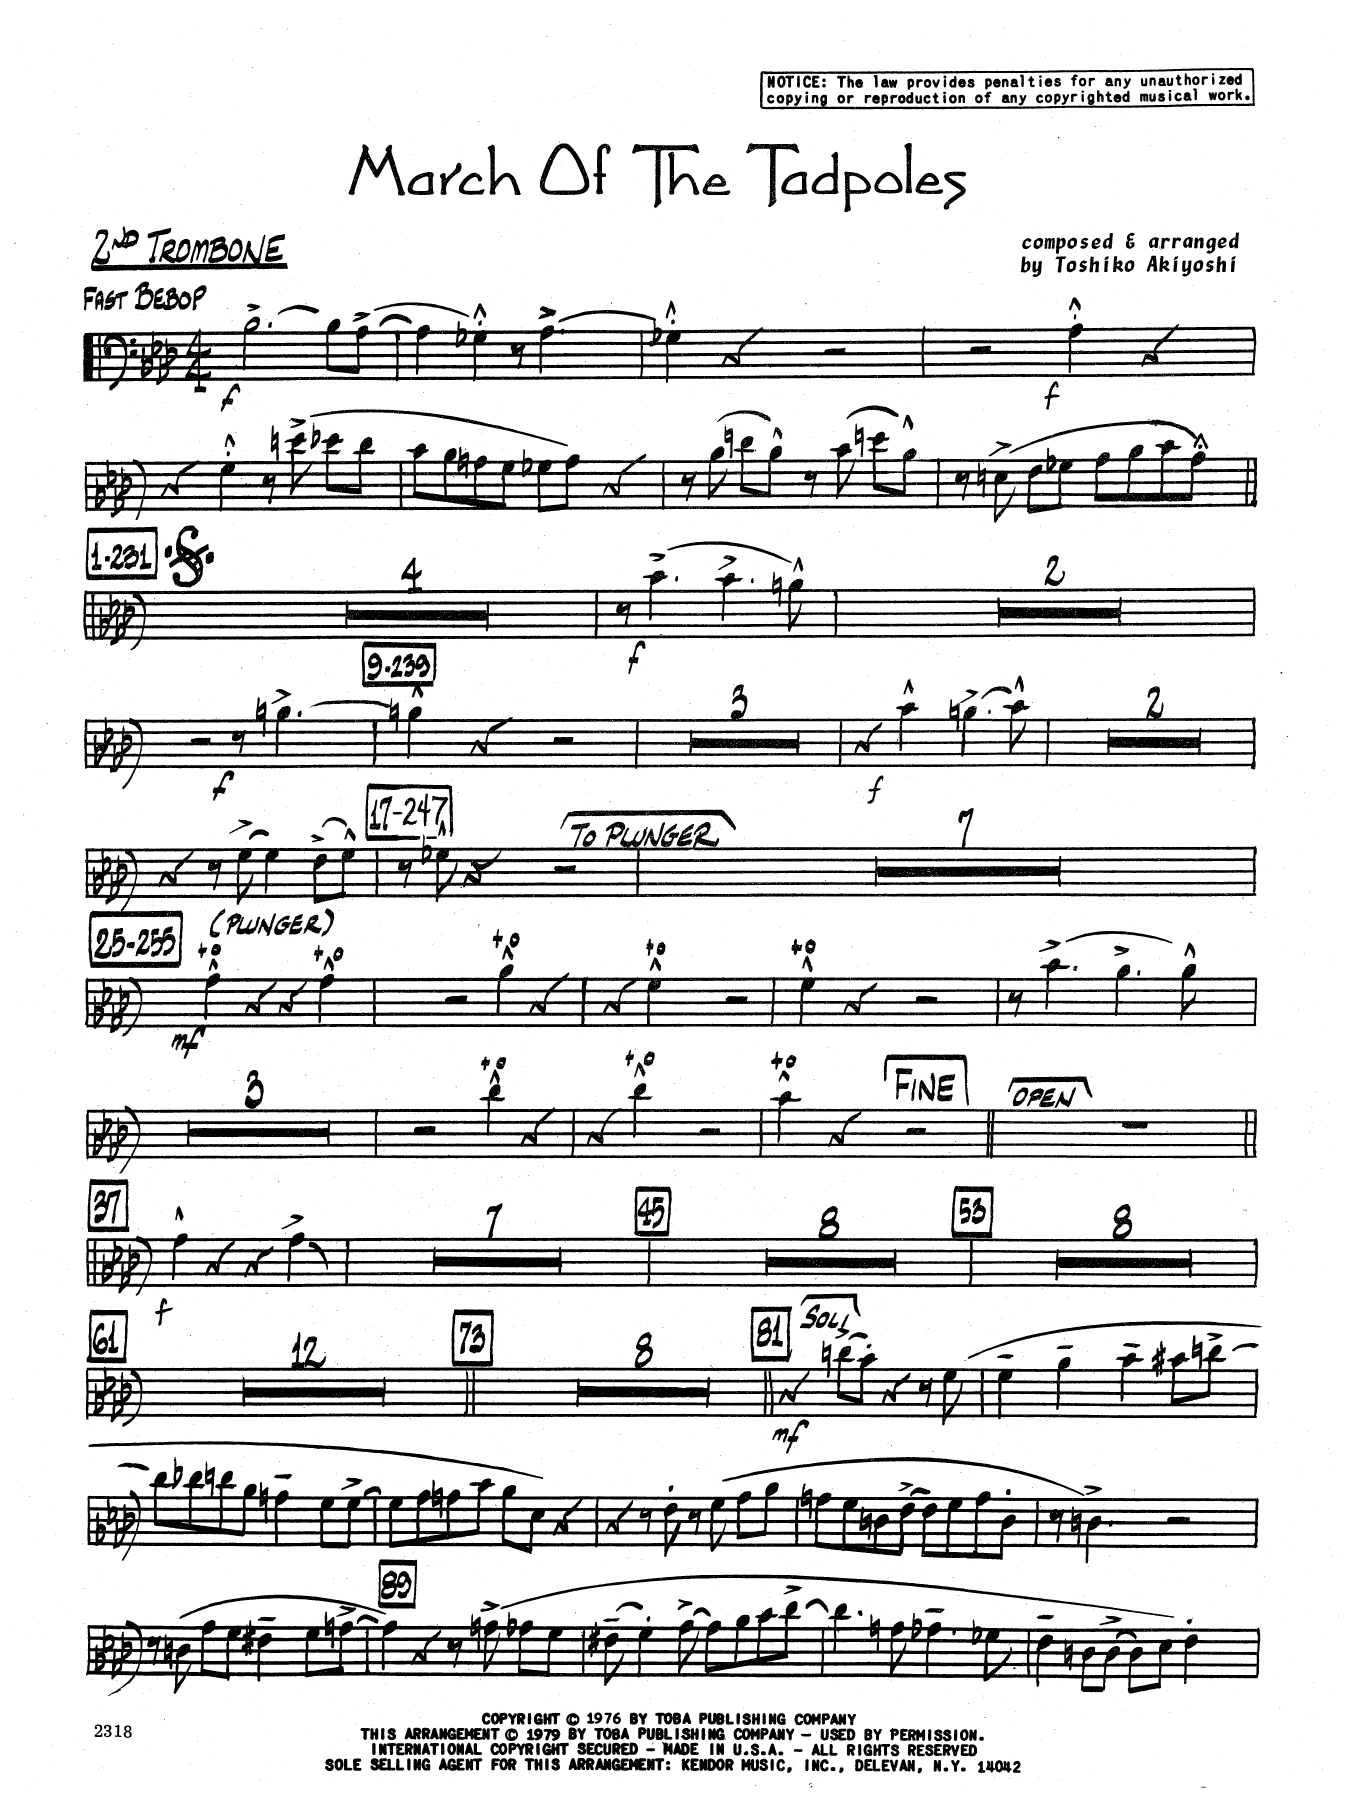 Toshiko Akiyoshi March Of The Tadpoles - 2nd Trombone sheet music preview music notes and score for Jazz Ensemble including 3 page(s)